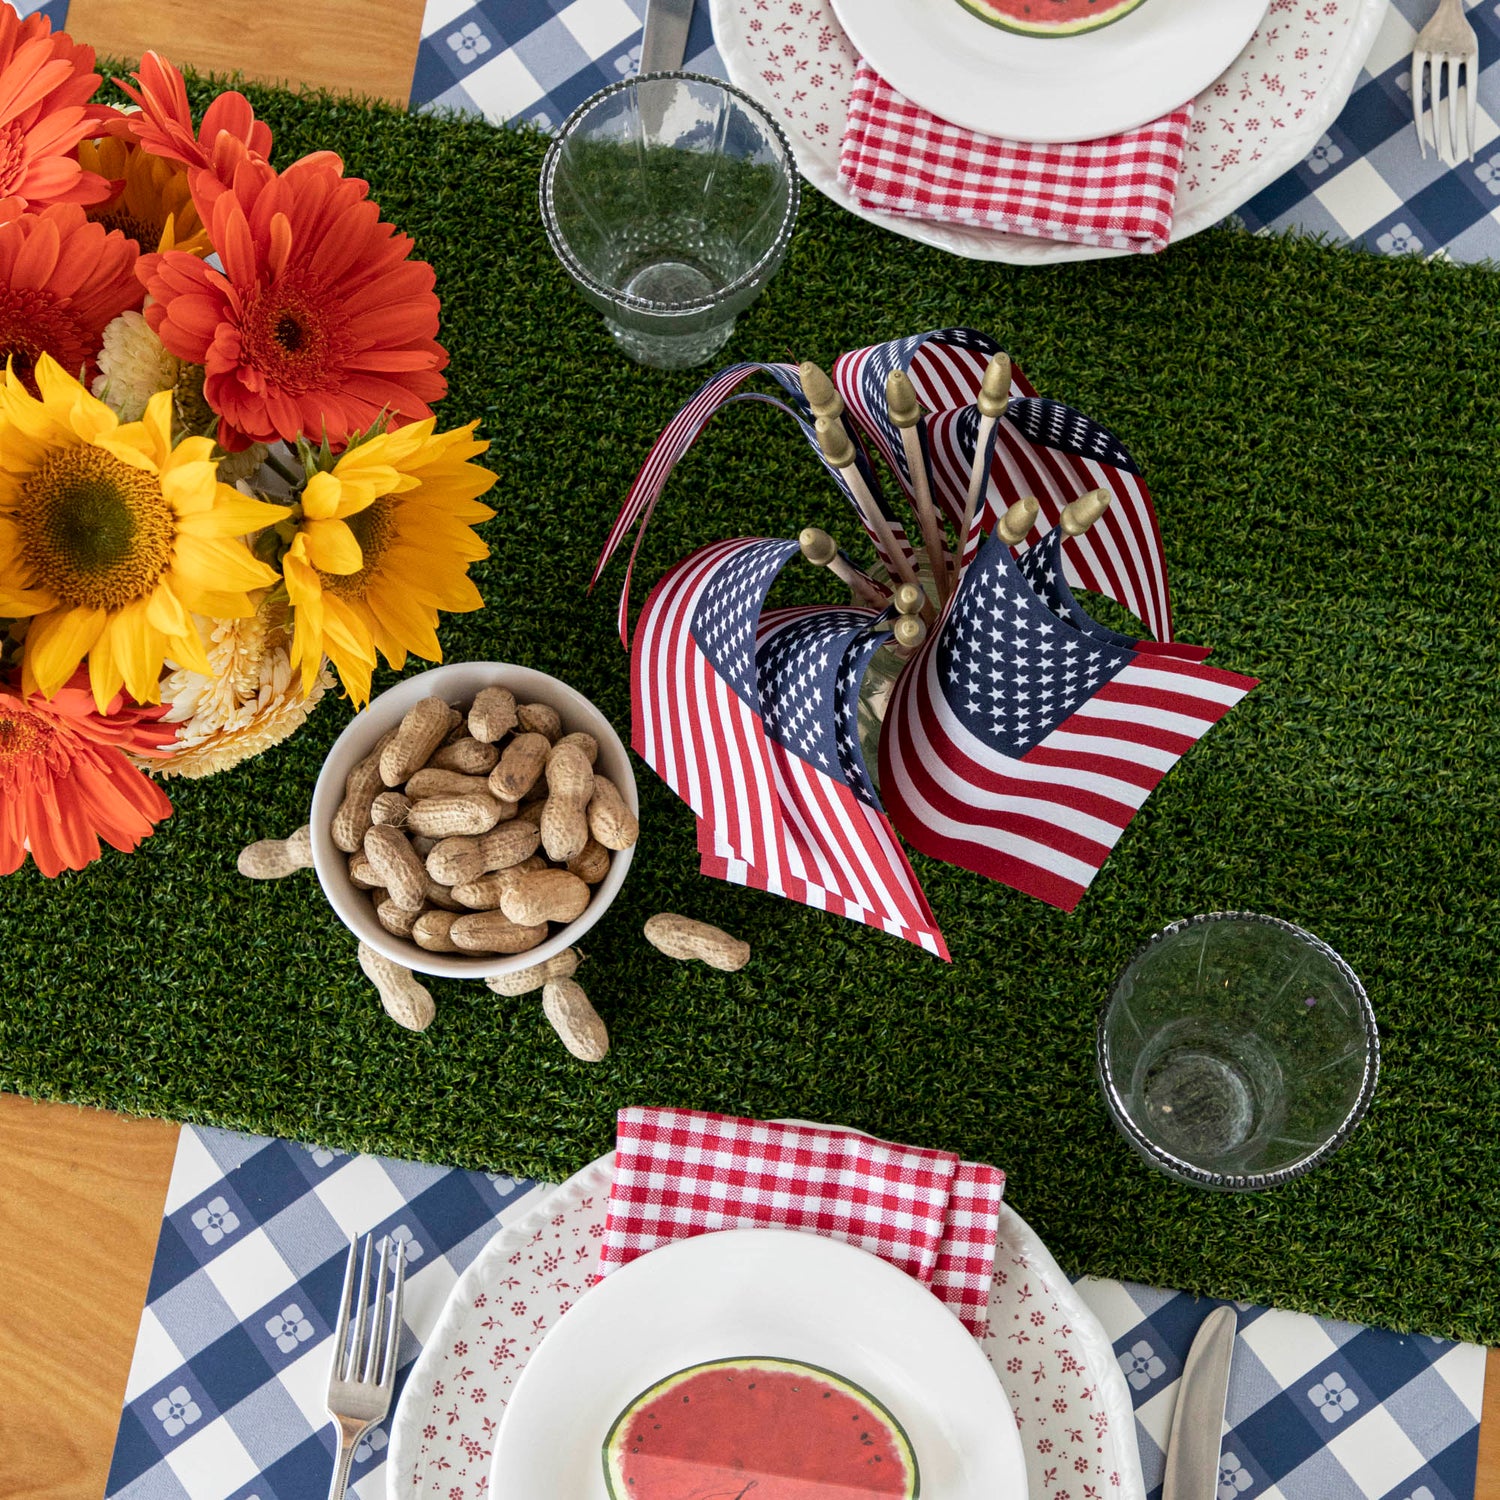 An artfully decorated table set for a 4th of July party with a Talking Tables Artificial Grass Table Runner.